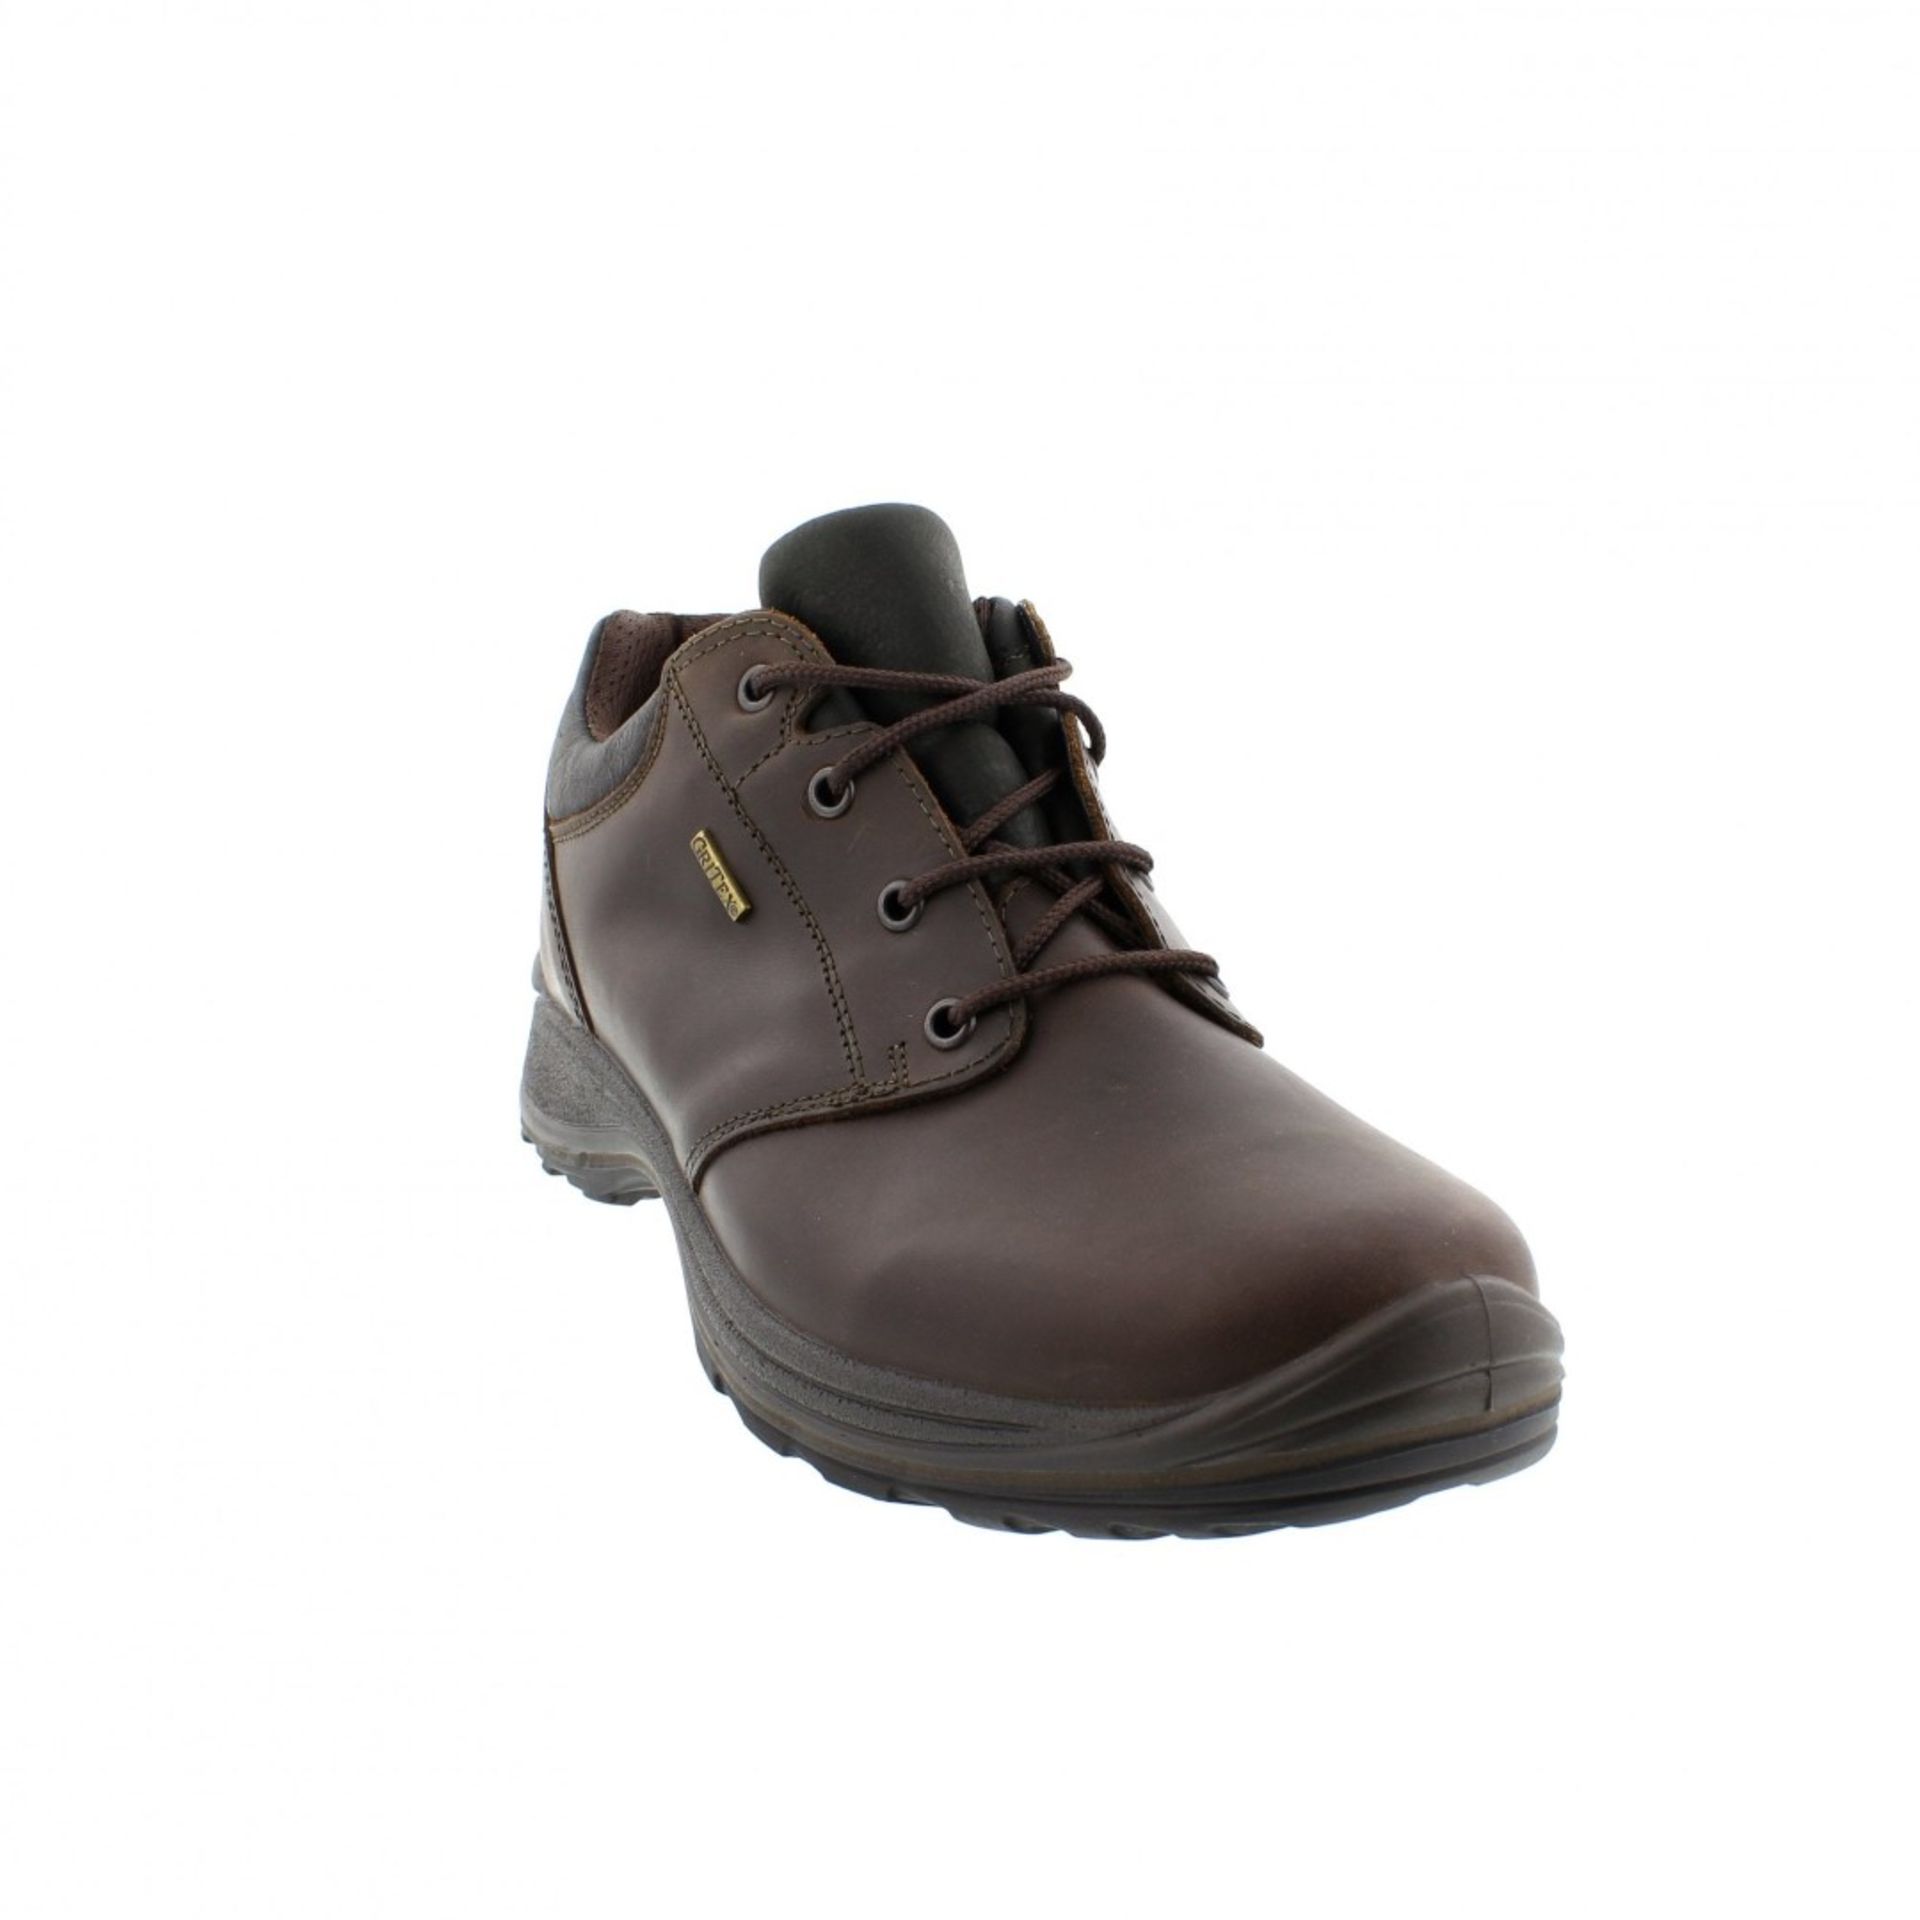 1 x Pair of Men's Grisport Brown Leather GriTex Shoes - Rogerson Footwear - Brand New and Boxed - - Image 5 of 10